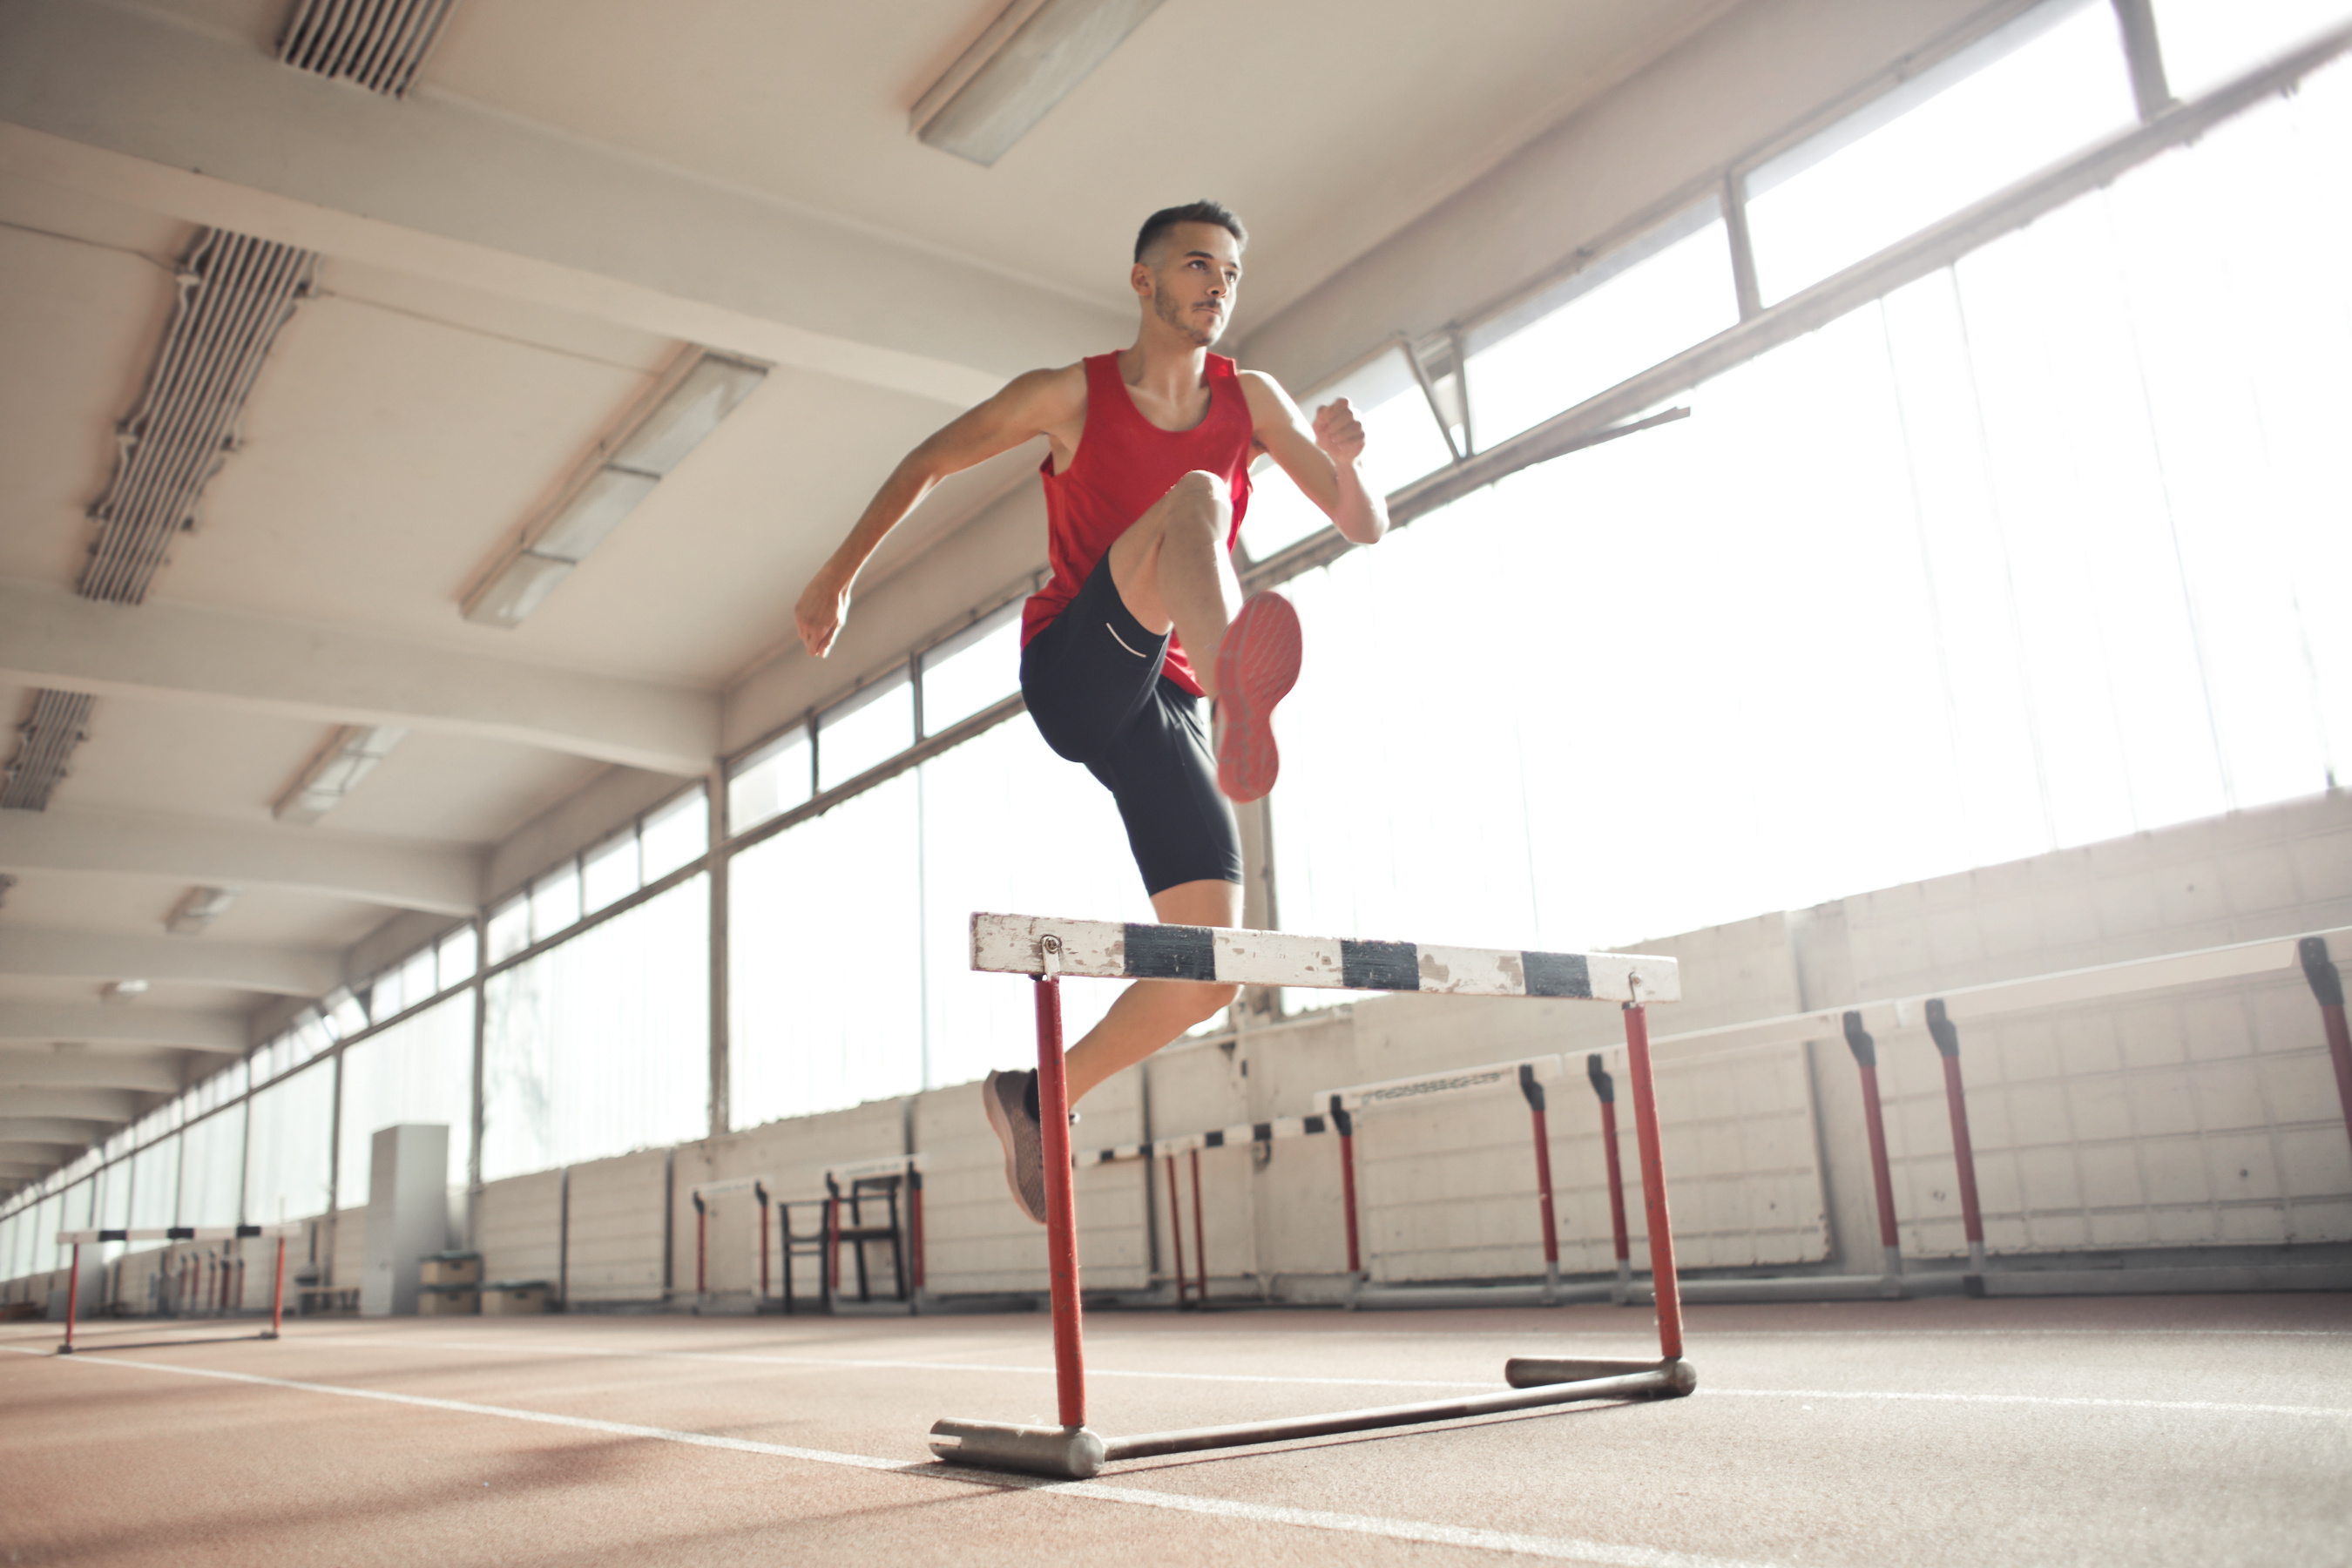 Hurdling: Training session, Track and field hurdles, Steeplechase, Jumping over a hurdle. 2700x1800 HD Background.